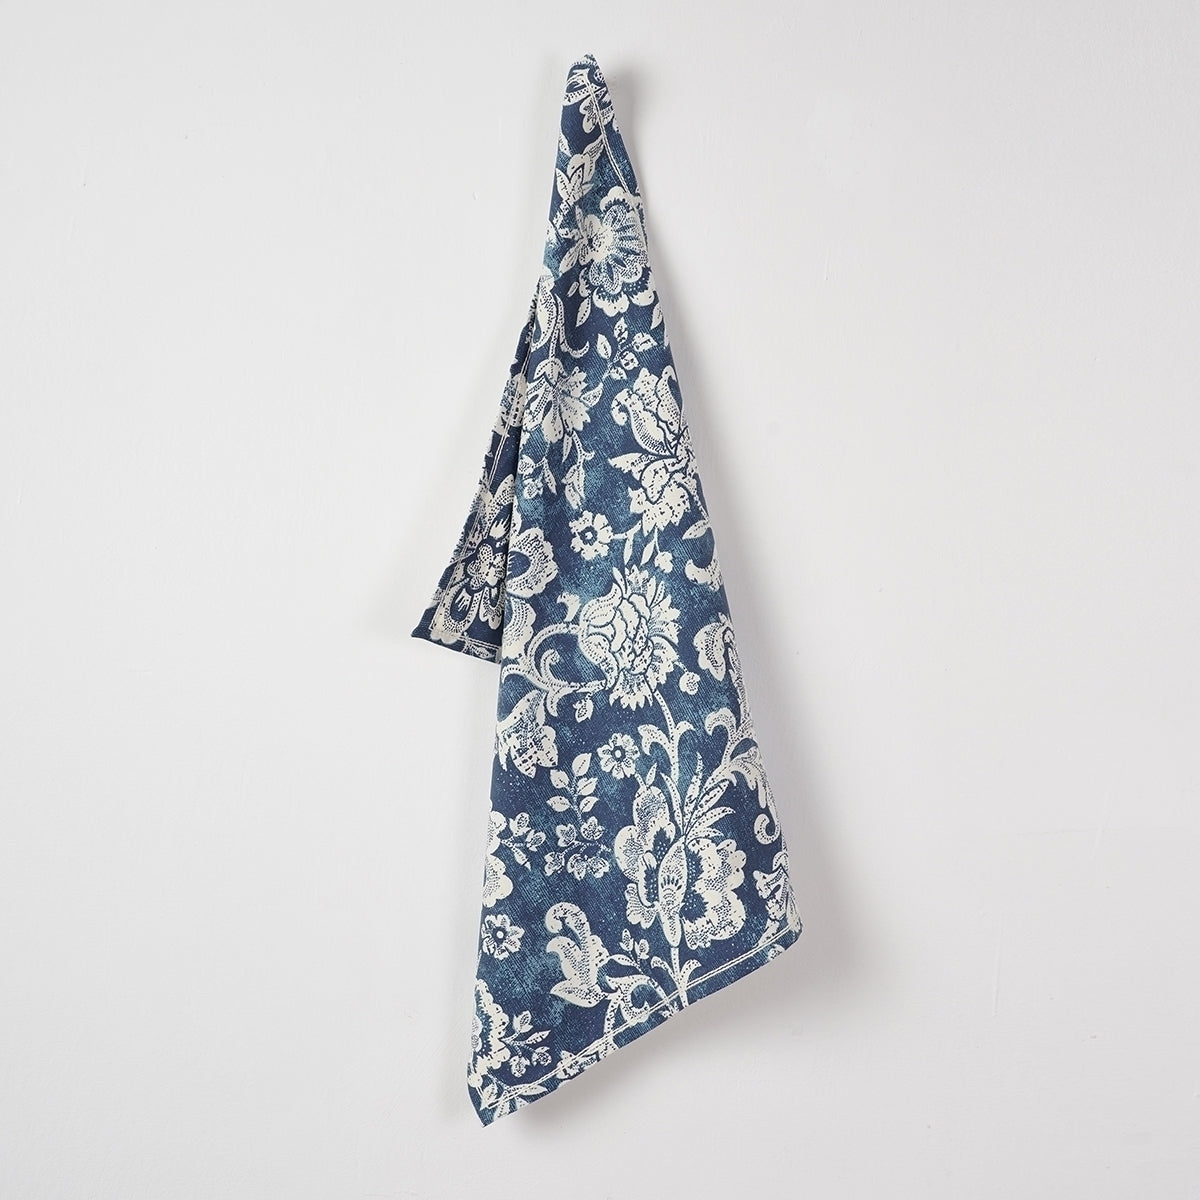 DOMINOTERIE Indigo Blue Printed Kitchen Towel, bold floral pattern, 100% cotton, size 20"X28"